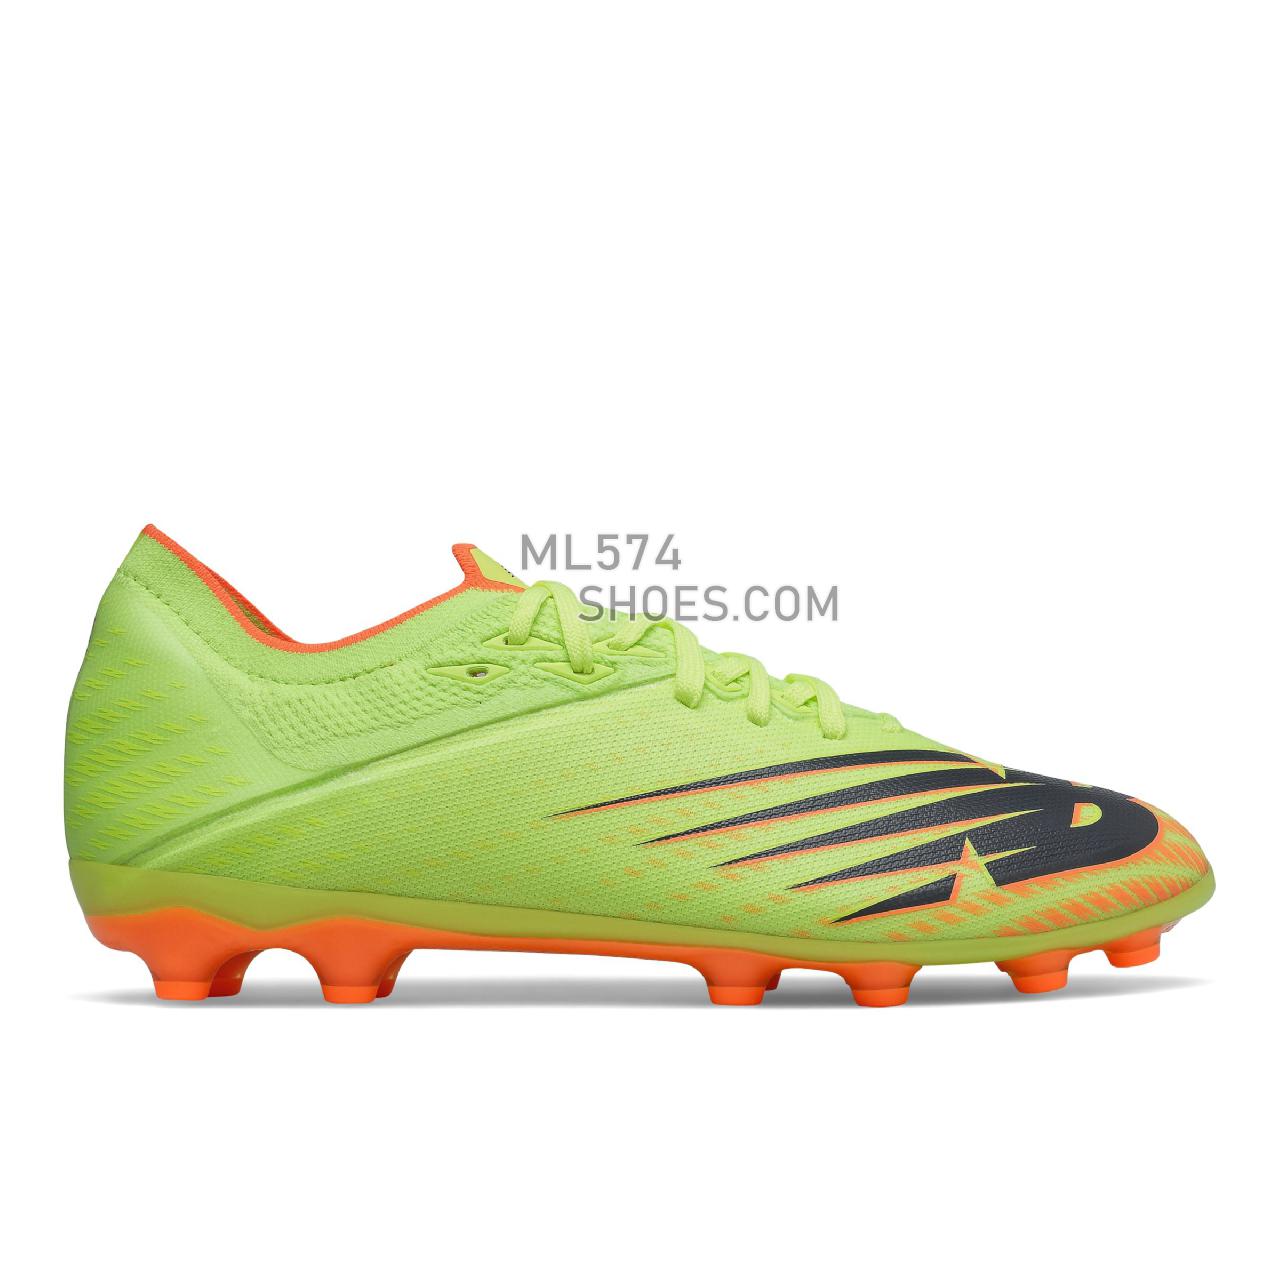 New Balance Furon v6+ Destroy AG - Men's Artificial Ground FootBall Boots - Bleached Lime Glo with Citrus Punch - MSF2AS65